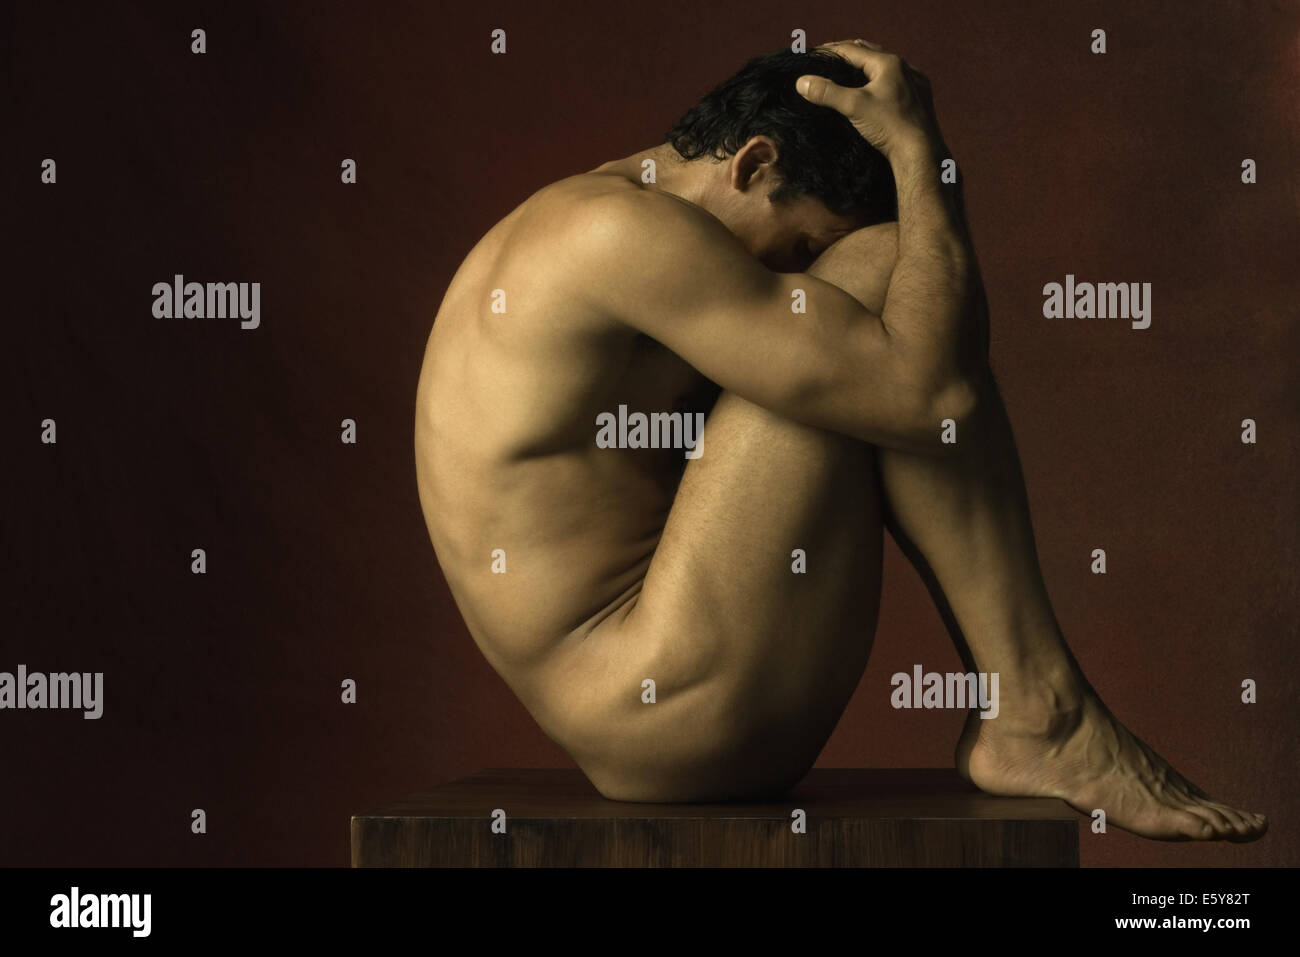 Nude man sitting in fetal position, hands on head, side view Stock Photo